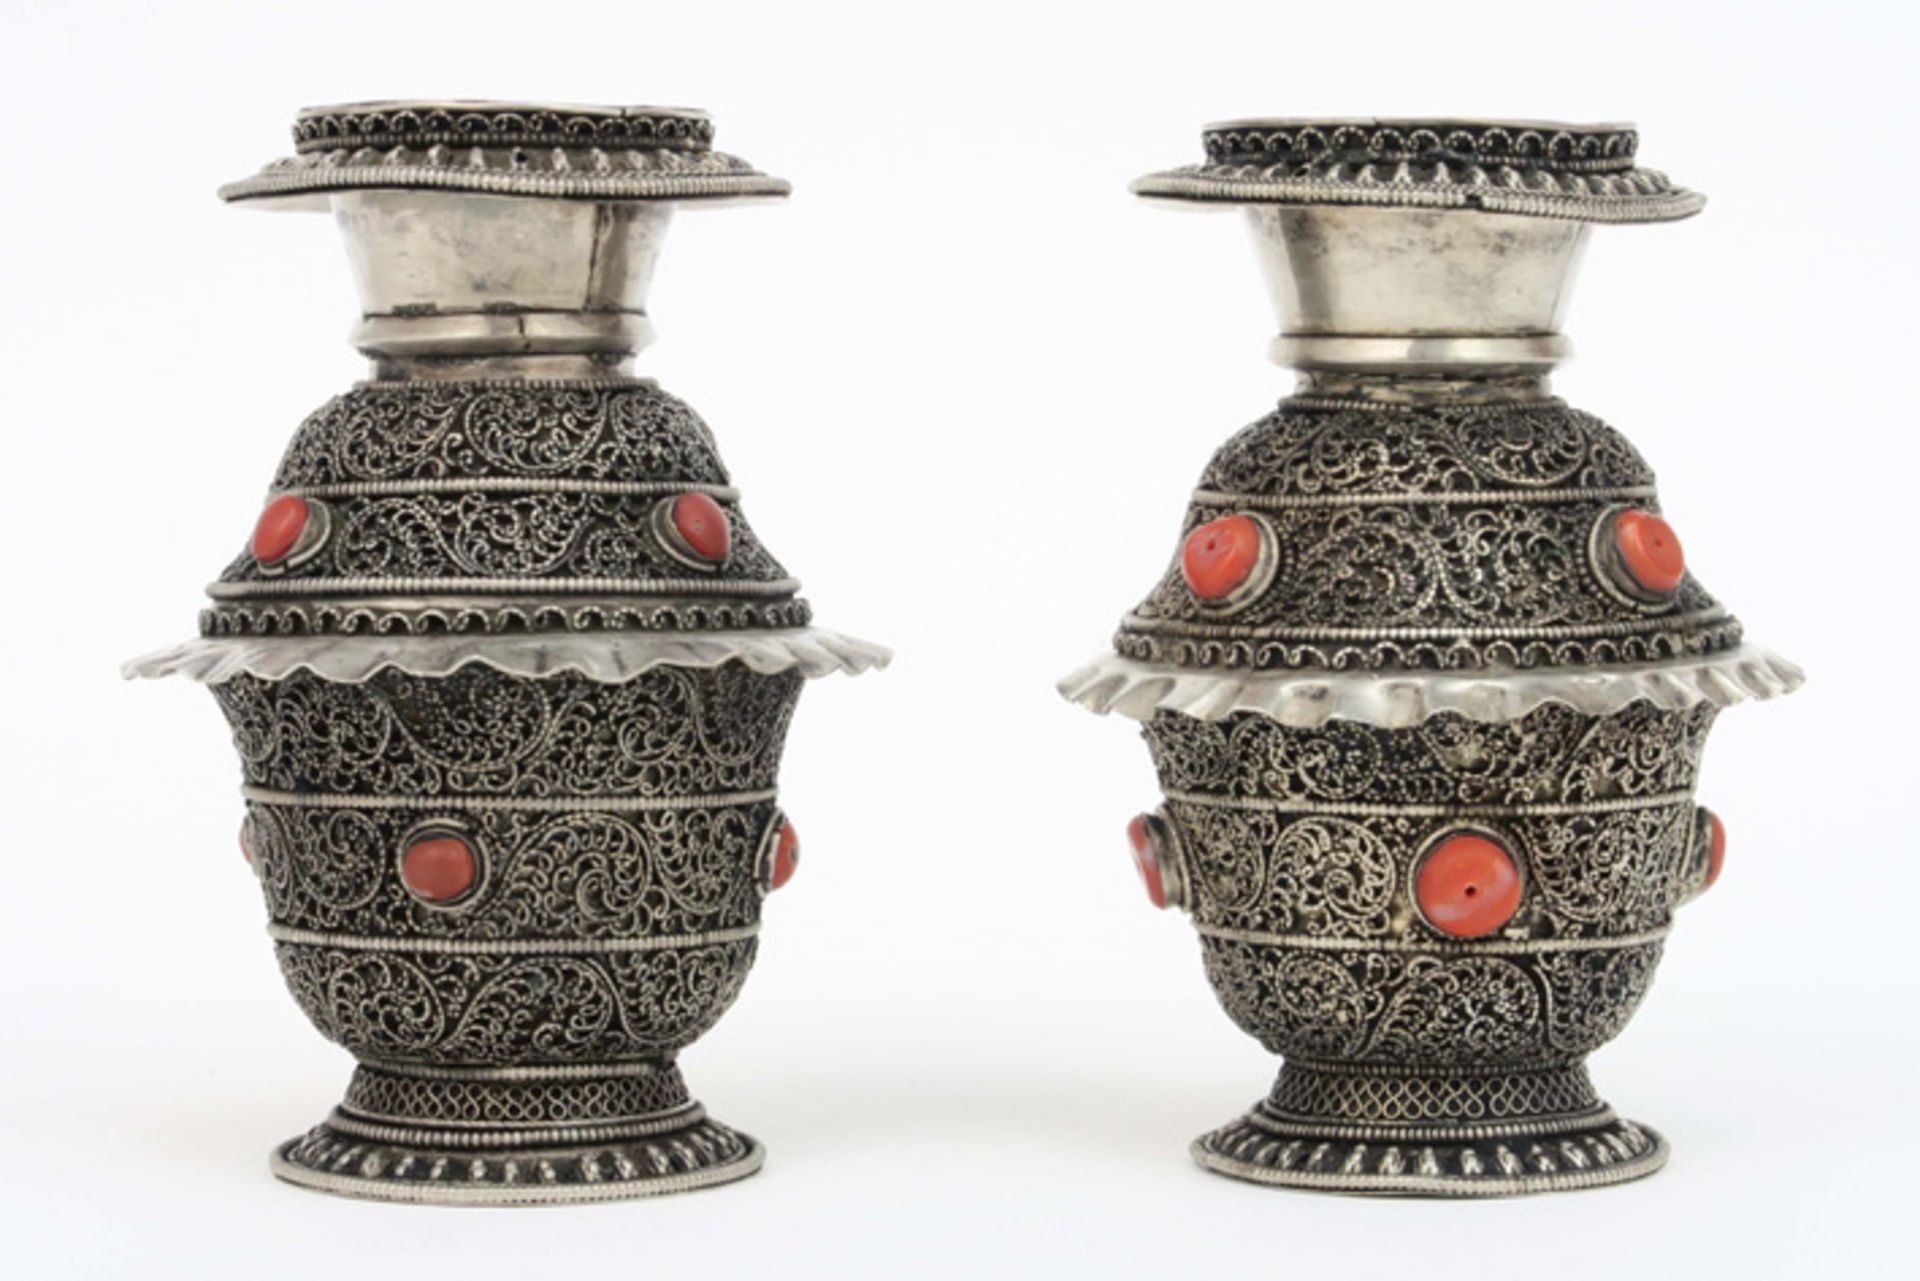 pair of antique Nepalese small vases in silver with coral - ca 1900 (or earlier)||Paar antieke